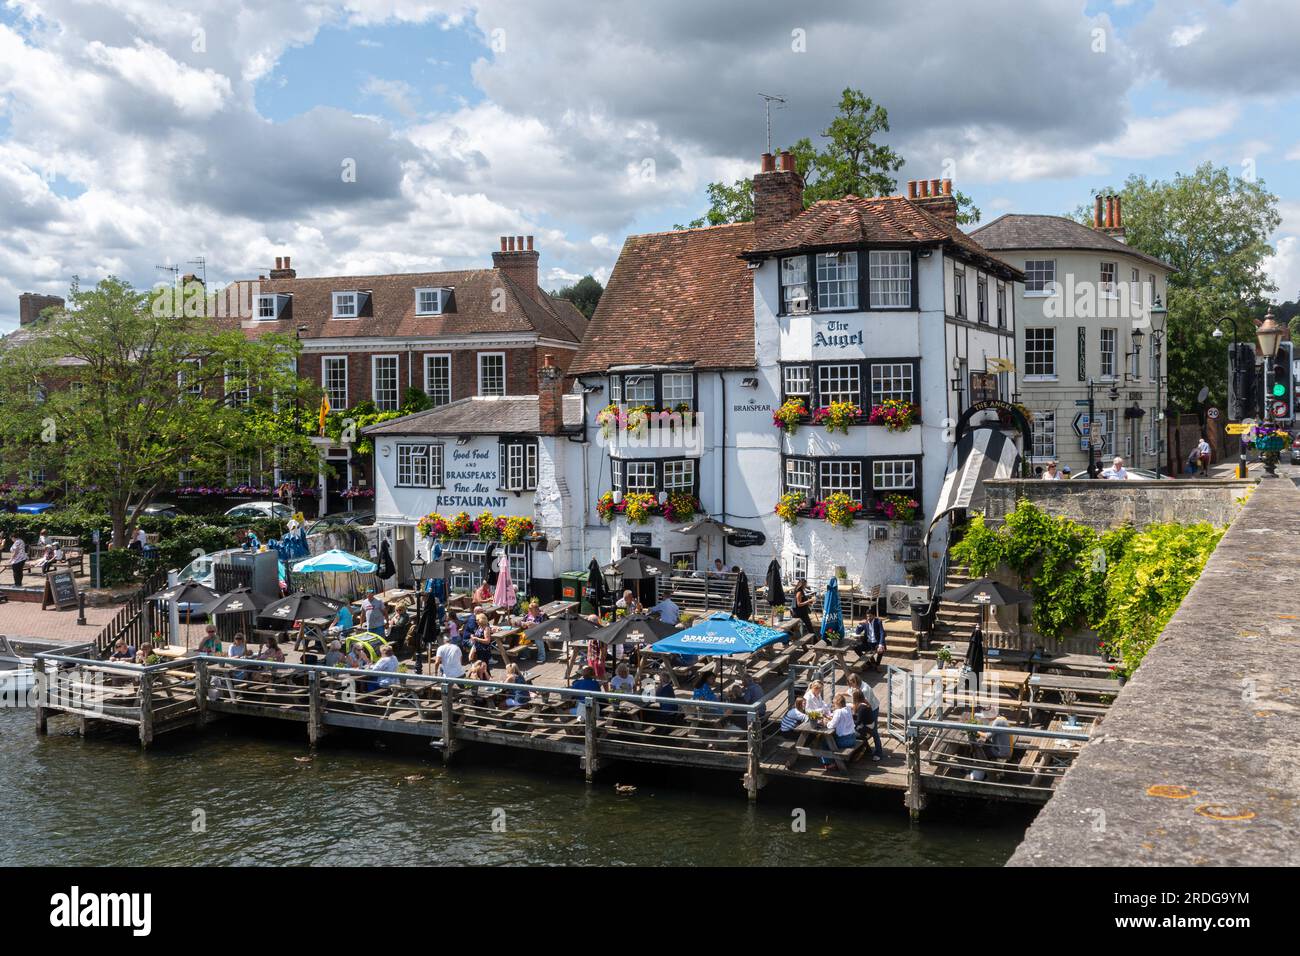 The Angel on the Bridge pub in Henley-on-Thames, Oxfordshire, England, UK, with people sitting outside on a summer day Stock Photo